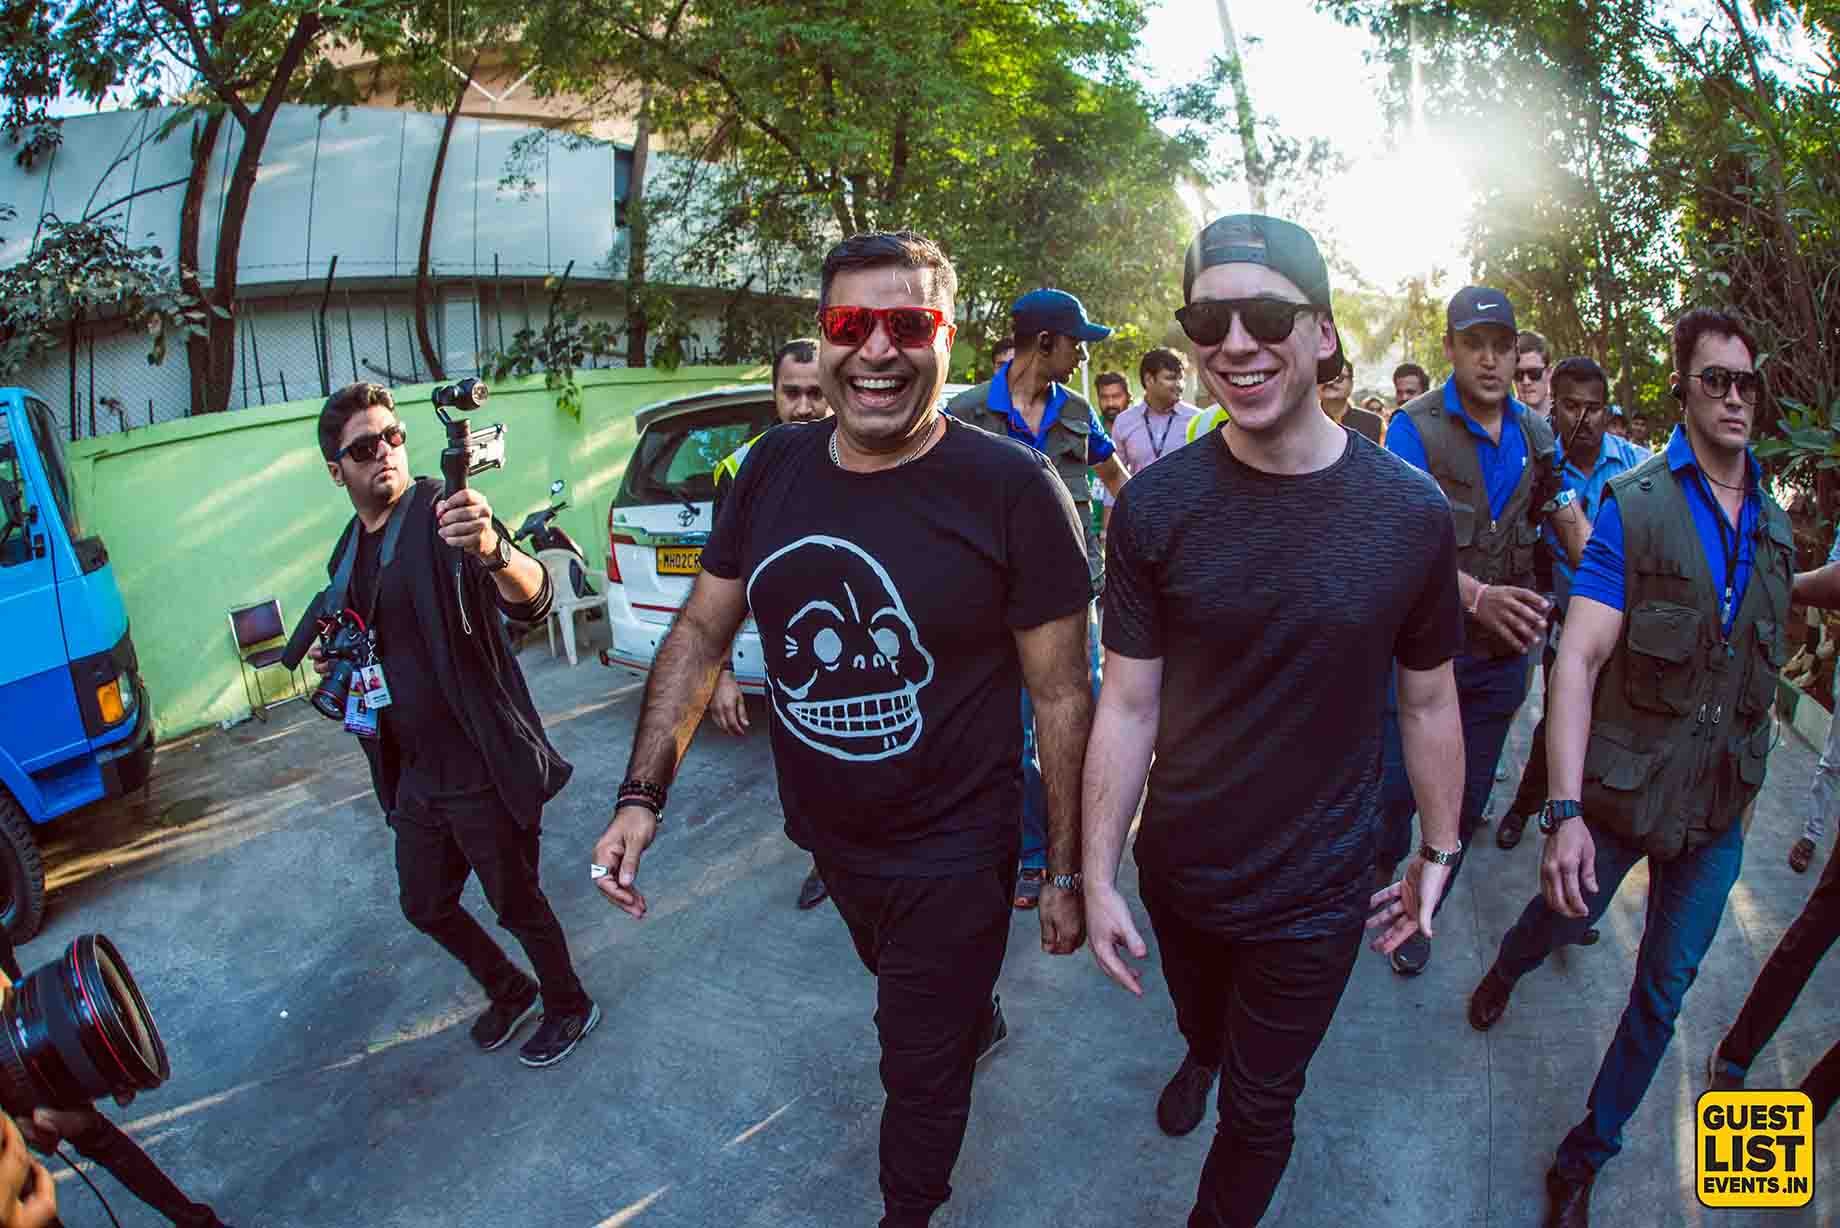 Shailendra Singh and Hardwell enter the World's Biggest Guestlist 